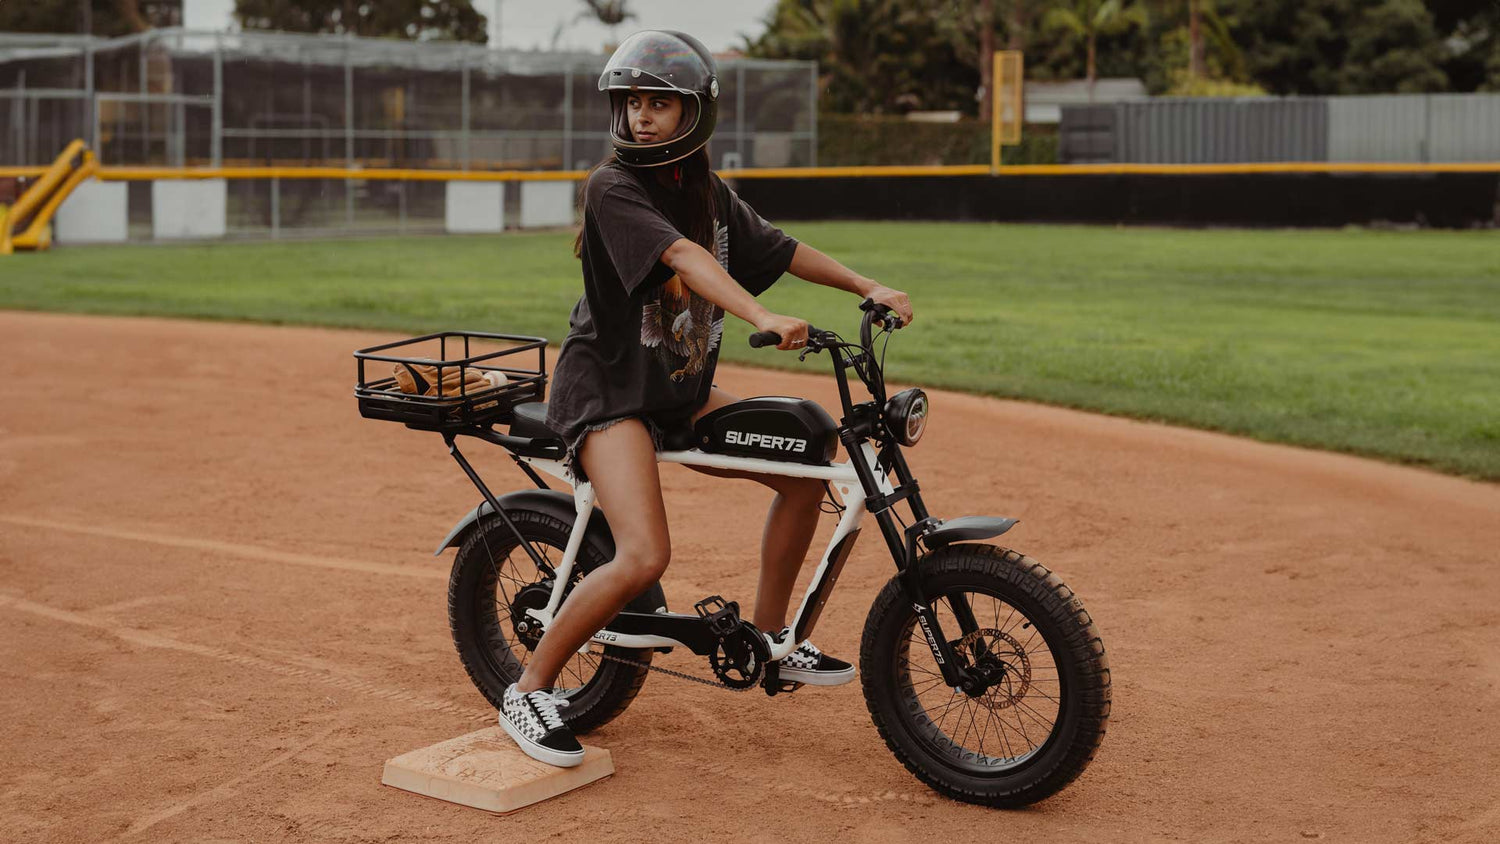 Image of a female rider wearing a helmet and sitting on a SUPER73-S2 ebike on a baseball field.